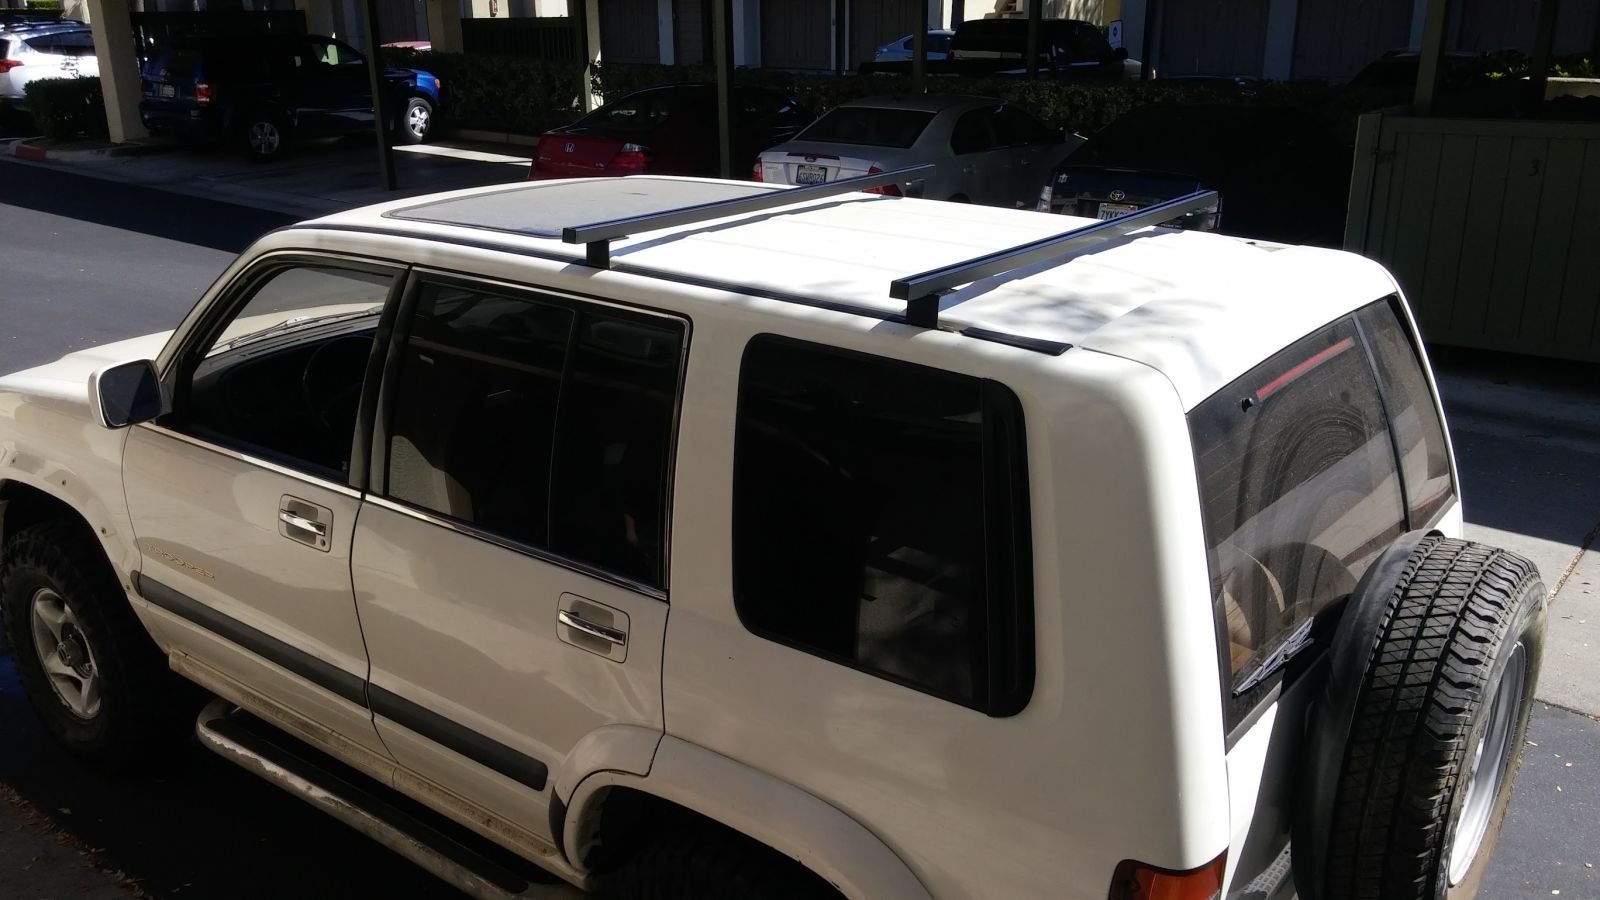 Finally got the right roof rack from a company called Surco. Recommended by forums.